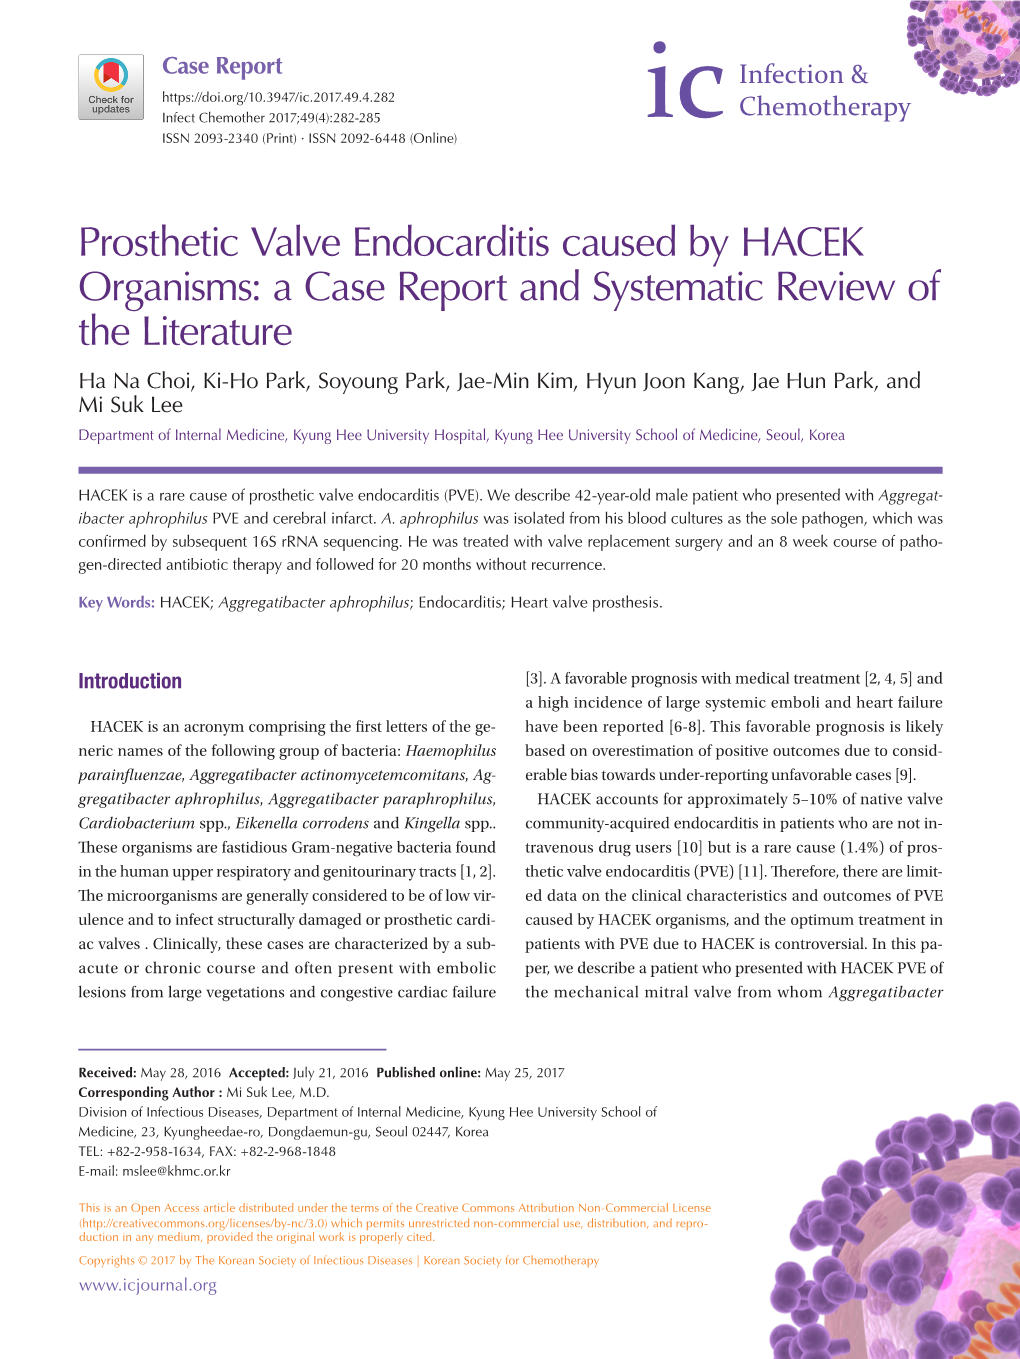 Prosthetic Valve Endocarditis Caused by HACEK